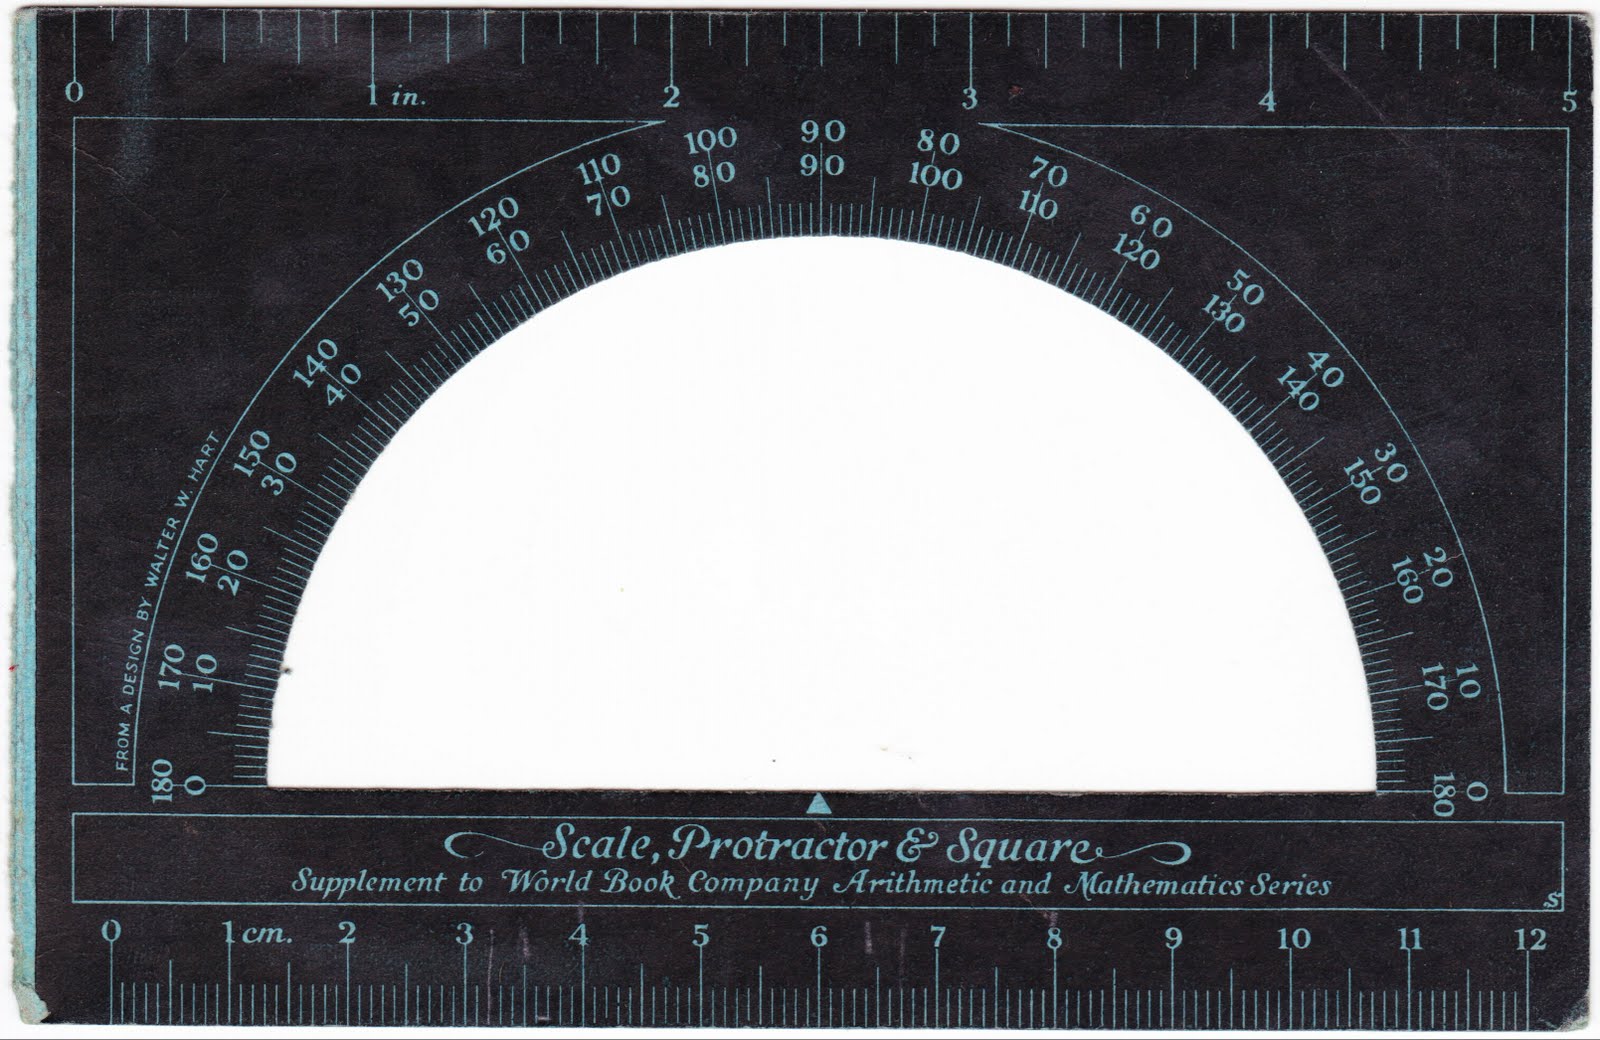 Papergreat: A protractor (and more) inside a 1938 arithmetic textbook